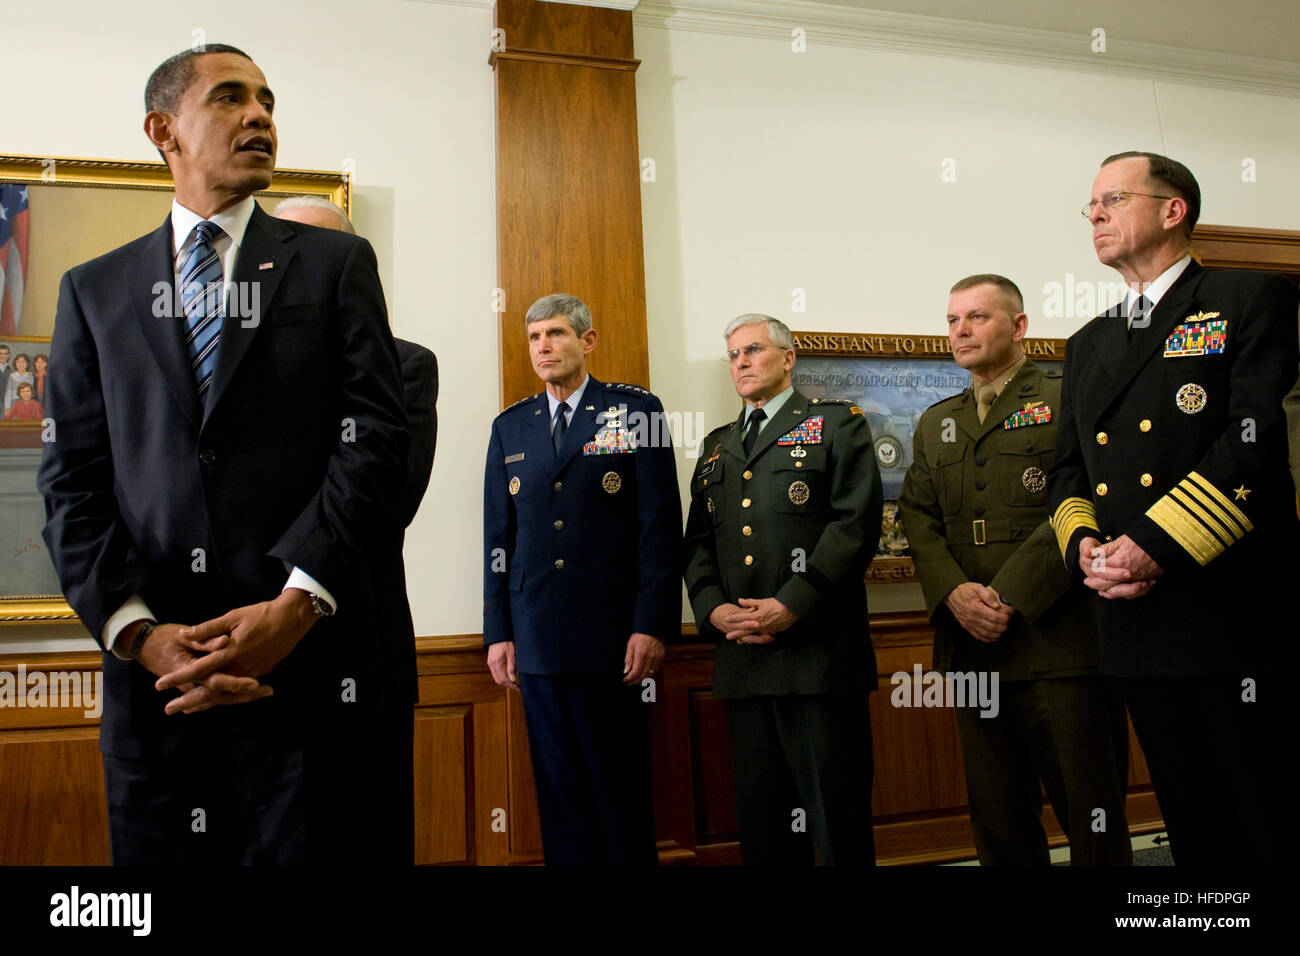 090128-N-0696M-200 President of the United States Barack Obama, flanked by Gen. Norton Schwartz, U.S. Air Force chief of staff; Gen. George W. Casey, U.S. Army chief of staff; U.S. Marine Gen. James E. Cartwright, vice chairman of the Joint Chiefs of Staff and U.S. Navy Adm. Mike Mullen, chairman of the joint chiefs of staff, addresses the media during his first visit to the Pentagon since becoming commander-in-chief, Jan. 28, 2009. Obama and Vice President Joe Biden met with Secretary of Defense Robert M. Gates and all the service chiefs getting their inputs on the way ahead in Afghanistan an Stock Photo